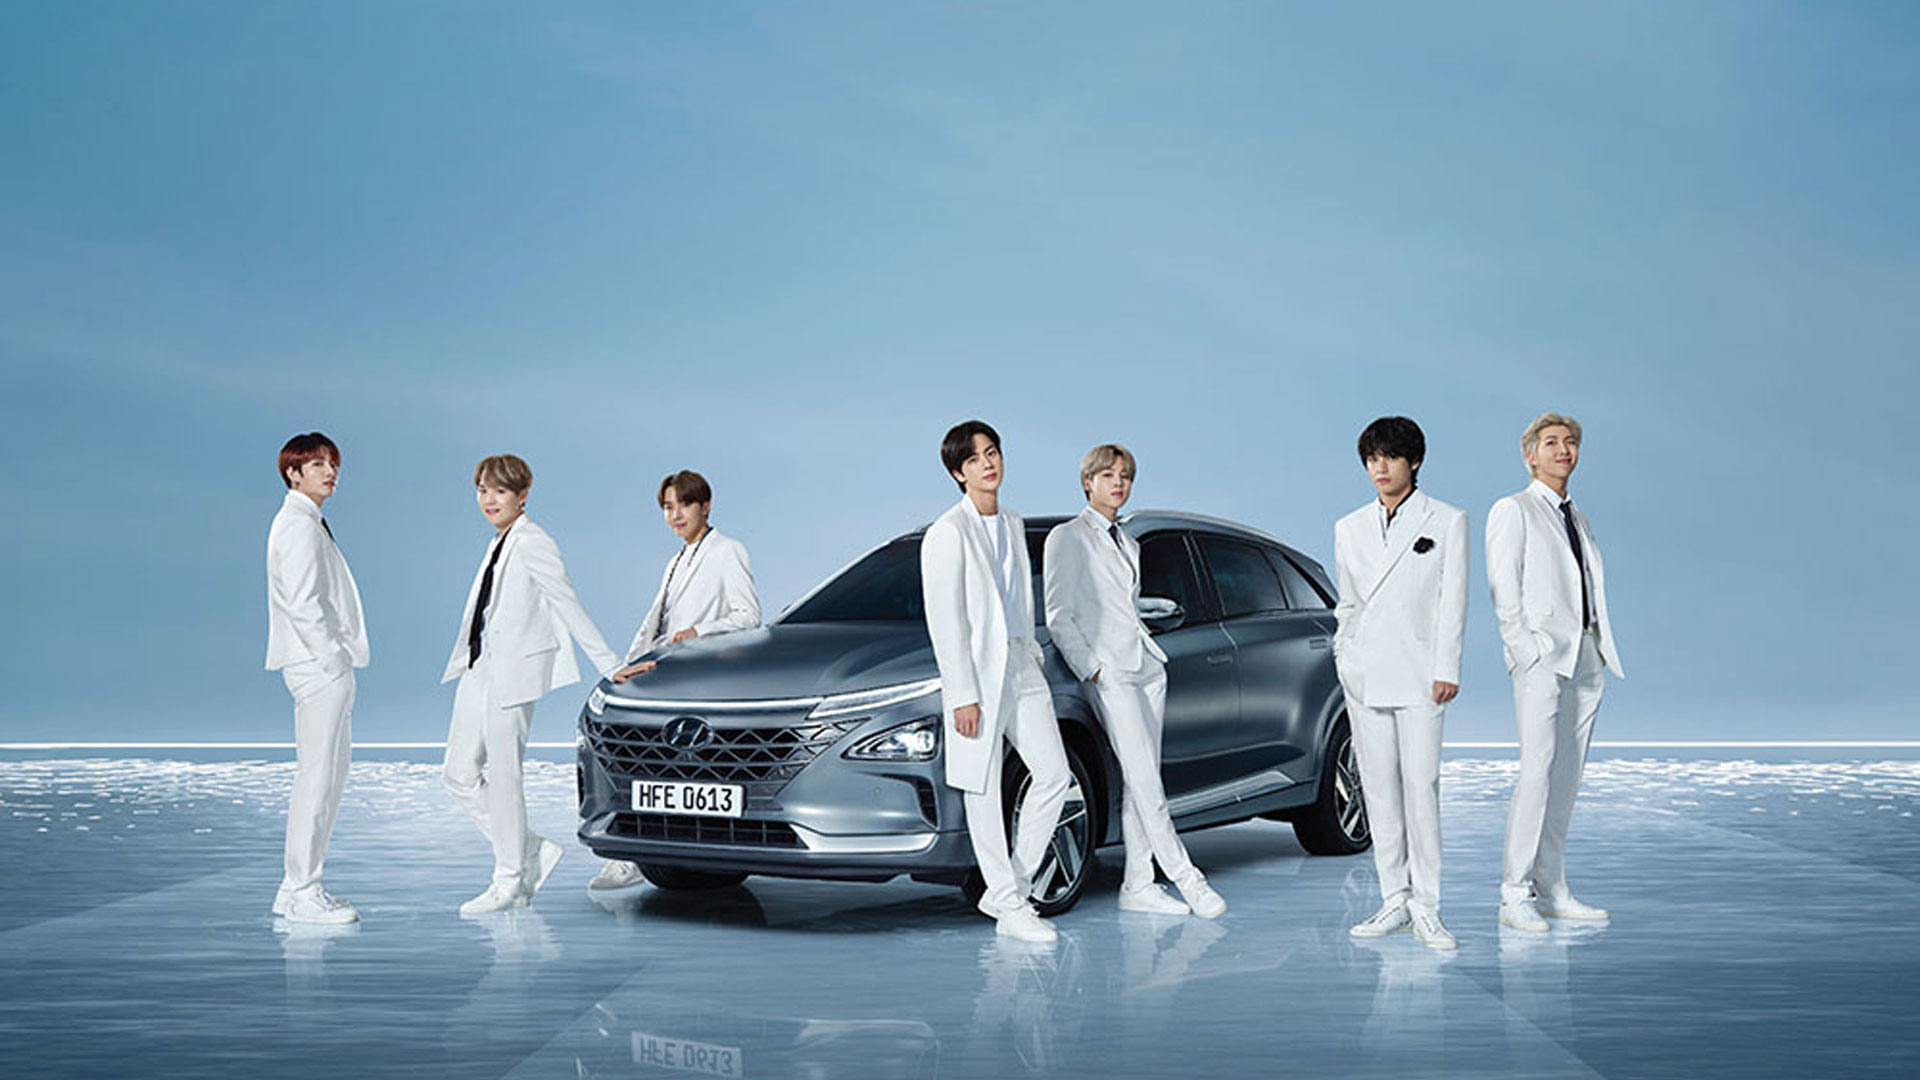 Hyundai Motor Celebrates Earth Day with BTS in New Global Hydrogen Campaign Film